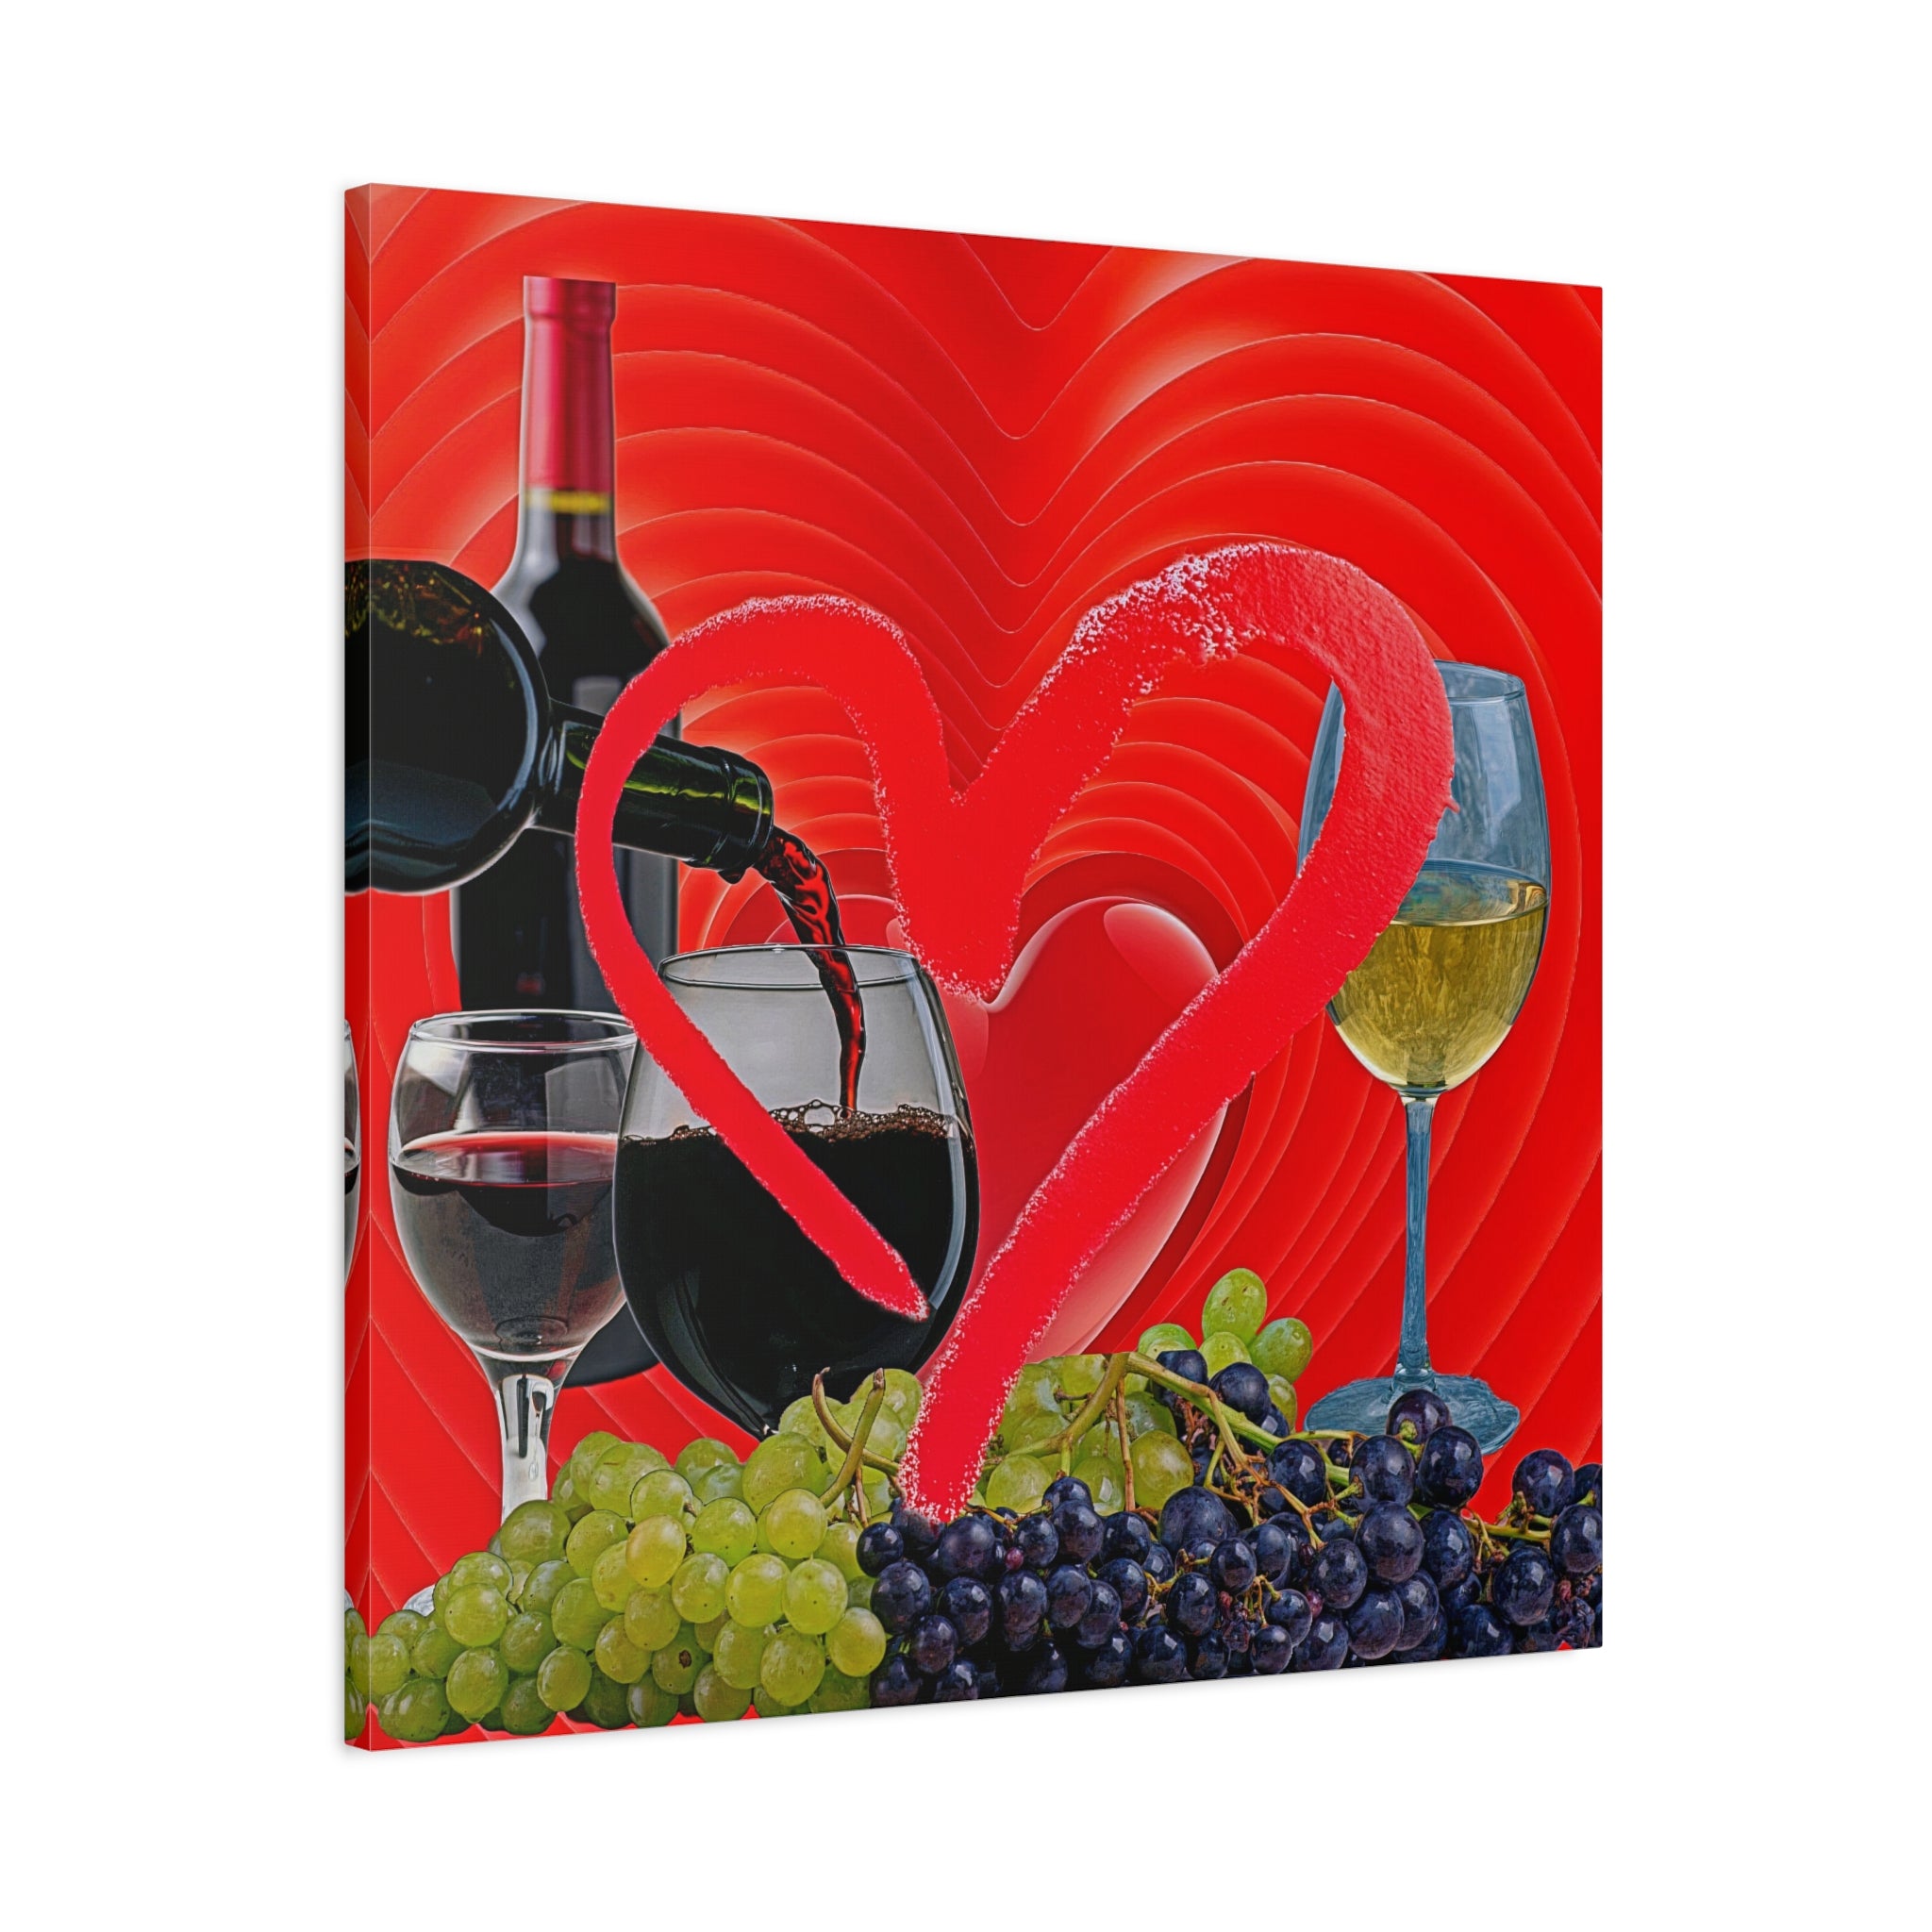 Wall Art LOVE WINE Canvas Print Food & Wine Painting Original Giclee 32x32 GW Nice Beauty Fun Design Fit Red Hot House Home Living Office Gift Ready to Hang